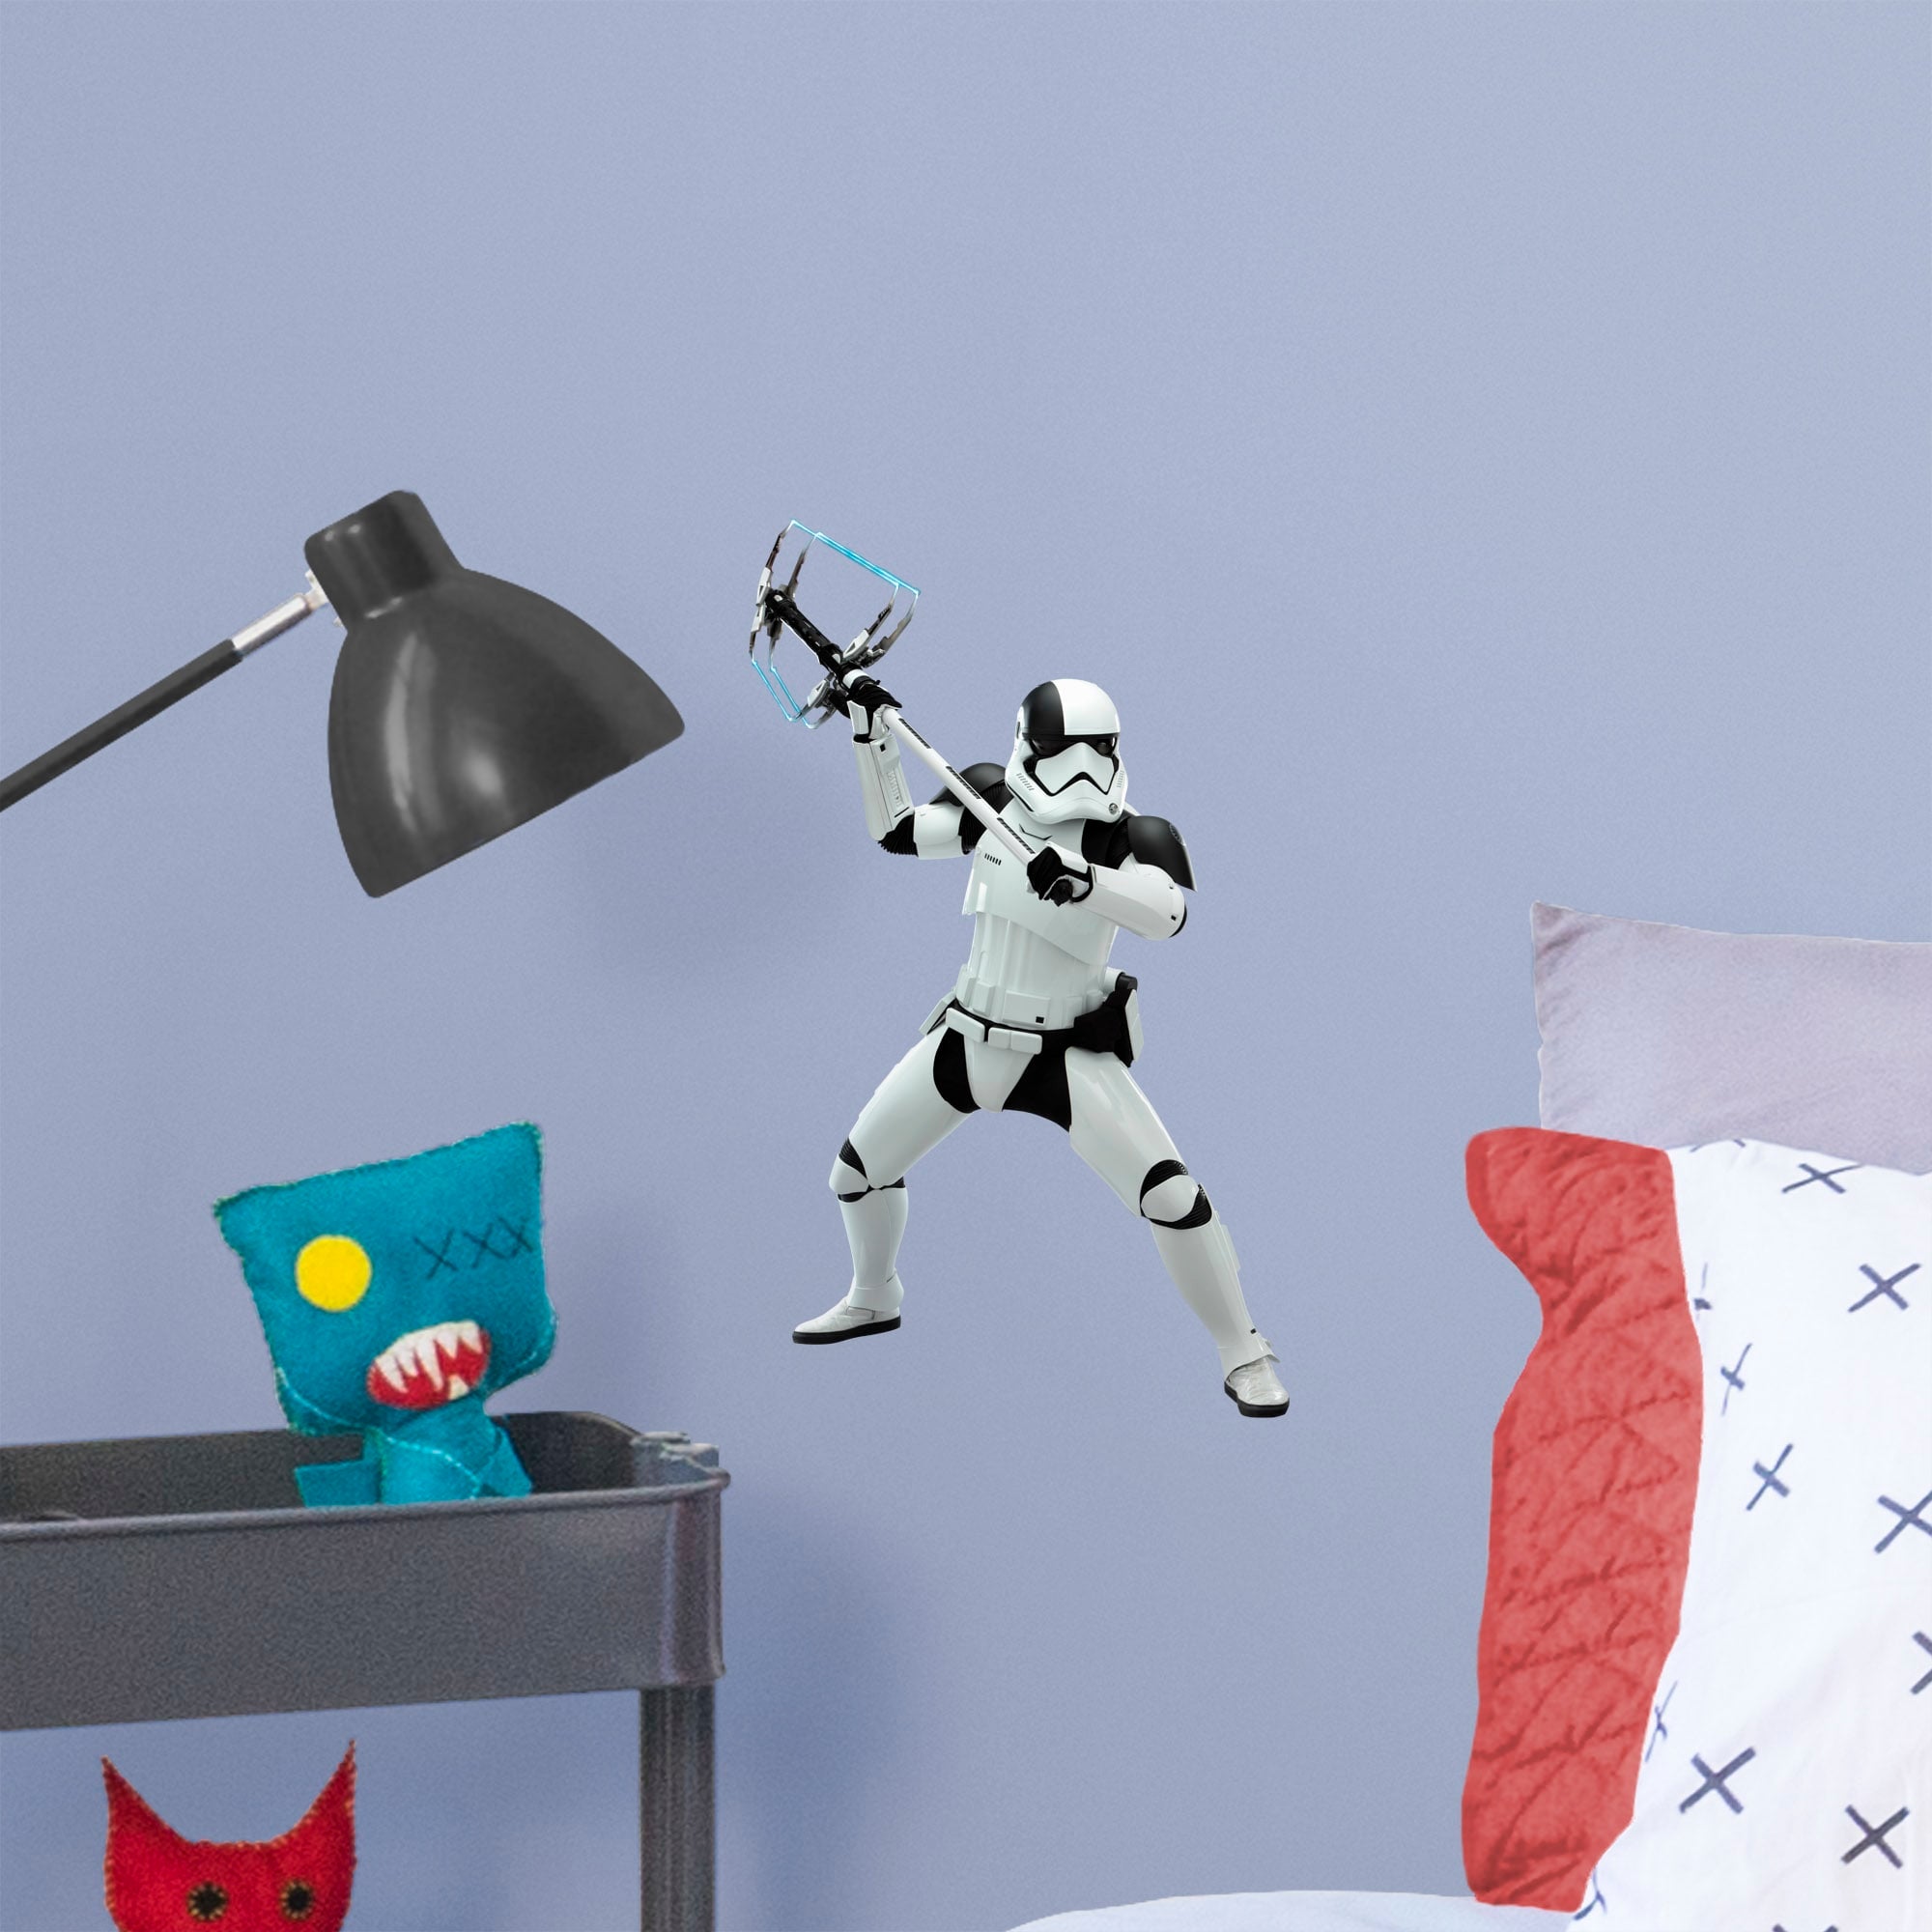 Executioner Trooper - Officially Licensed Removable Wall Decal Large by Fathead | Vinyl